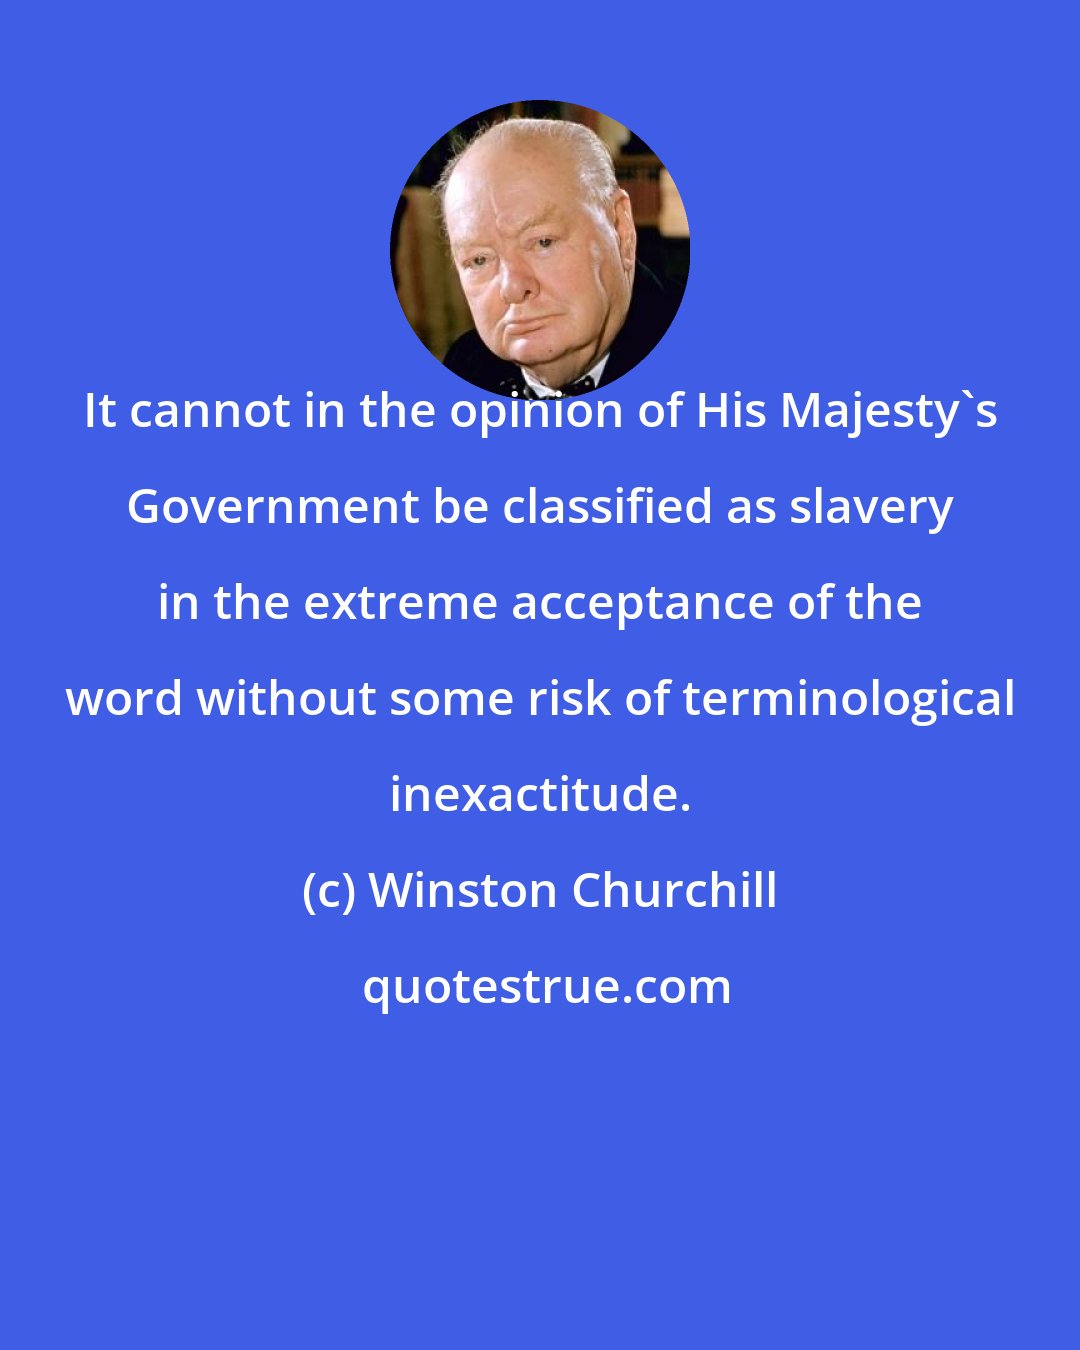 Winston Churchill: It cannot in the opinion of His Majesty's Government be classified as slavery in the extreme acceptance of the word without some risk of terminological inexactitude.